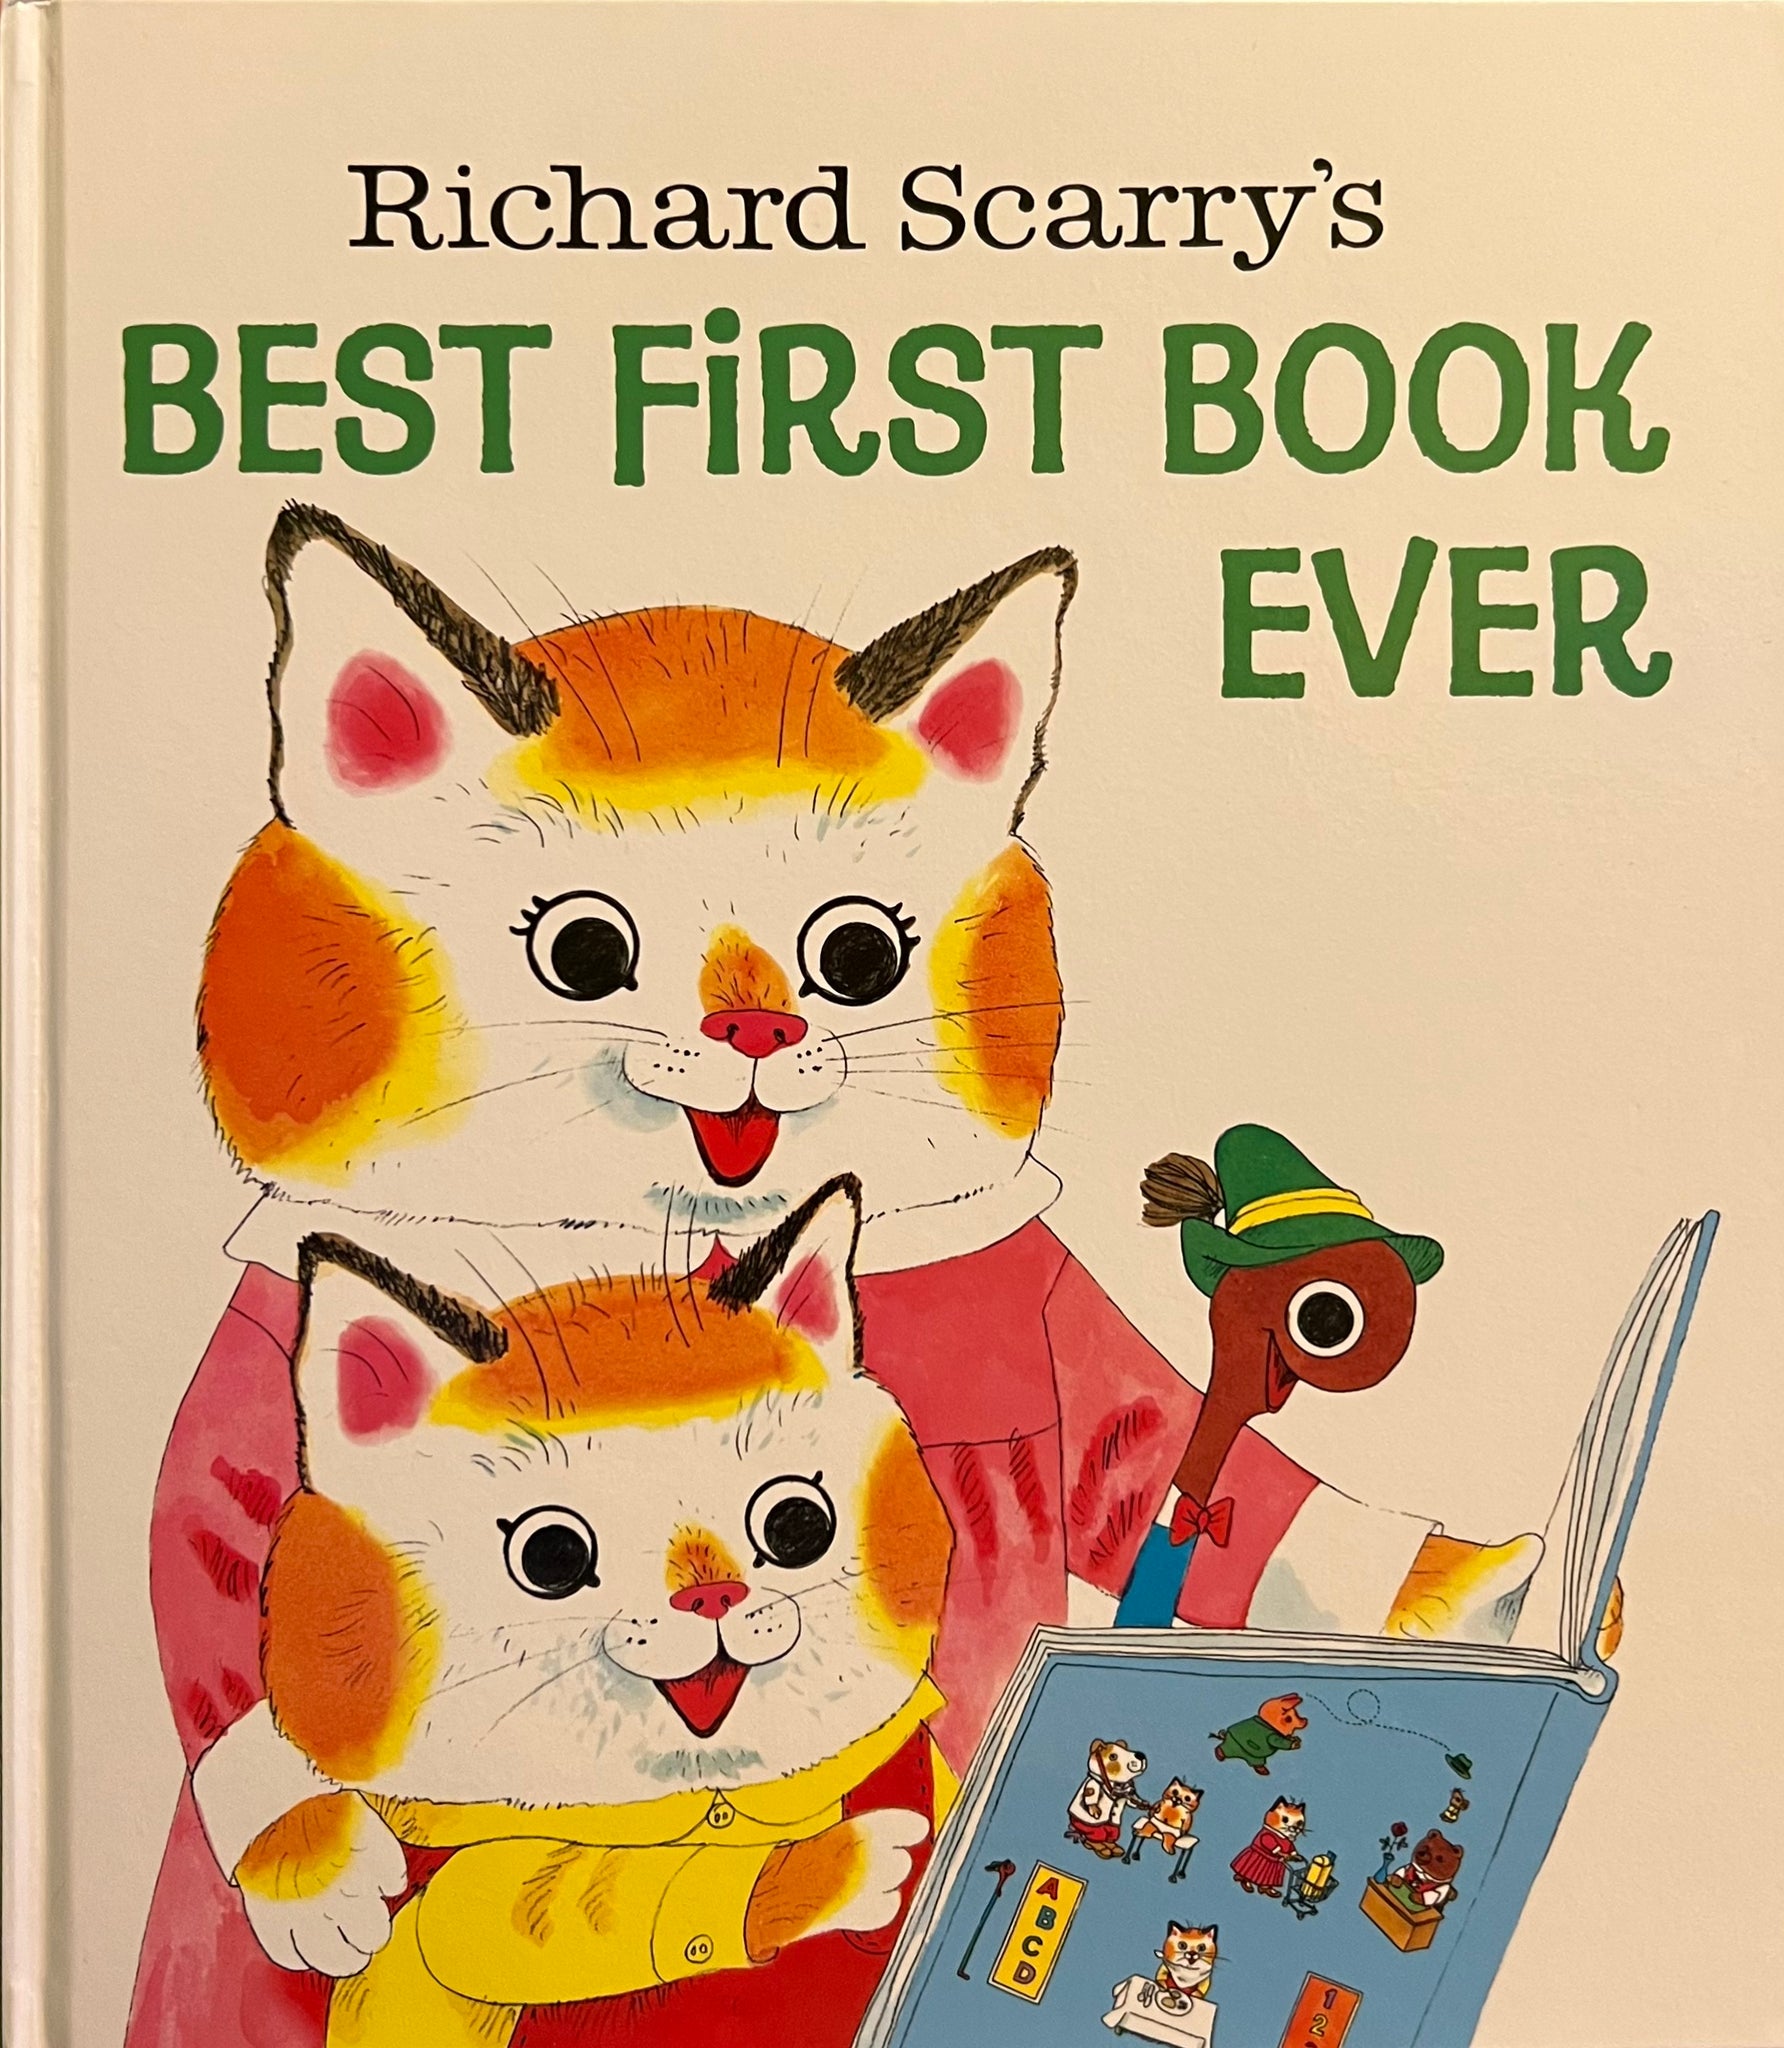 Best First Book Ever, Richard Scarry